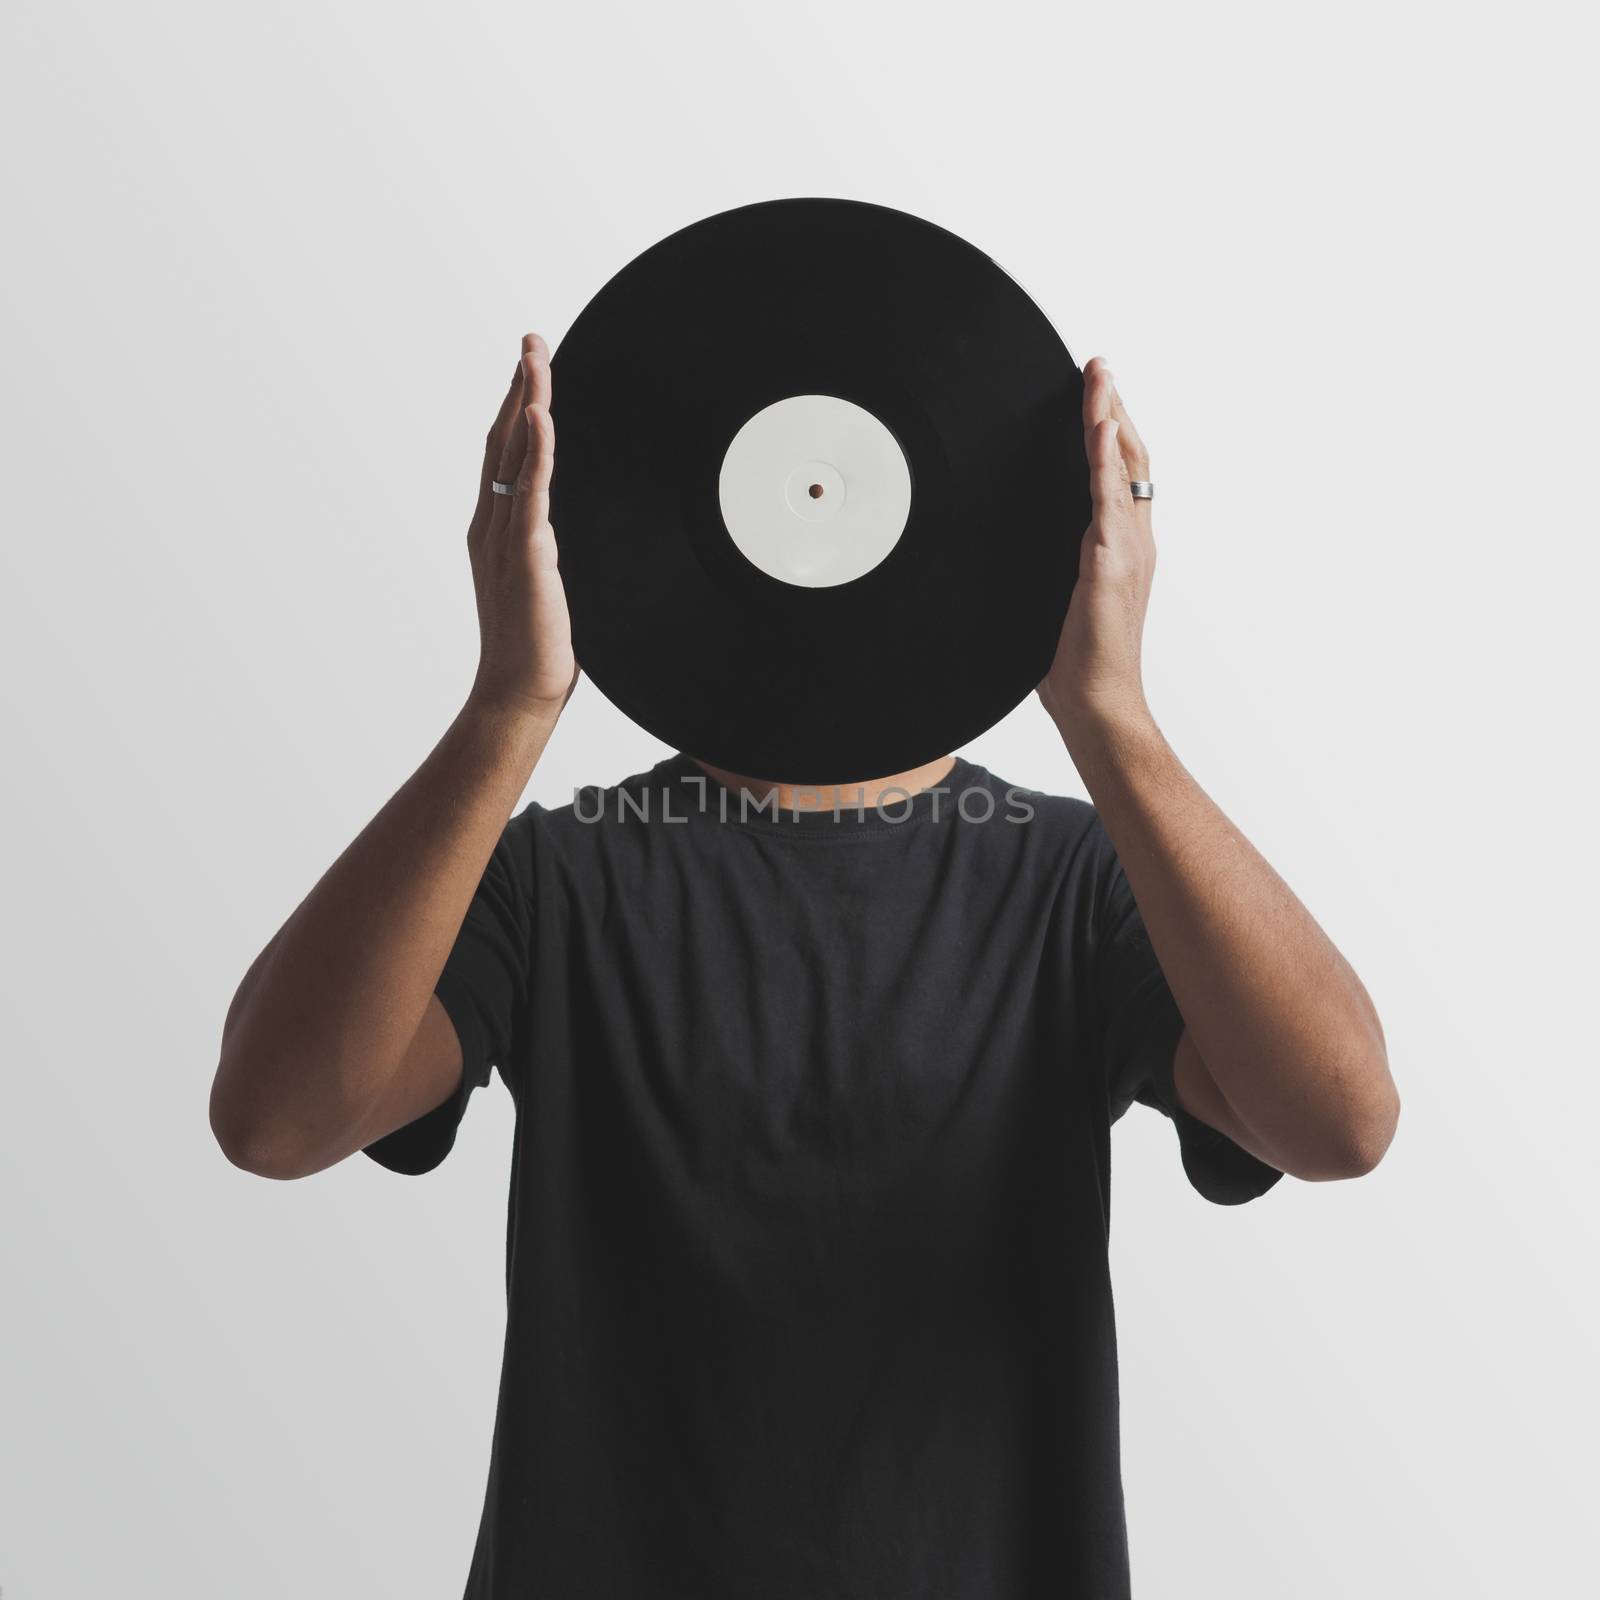 DJ holding a vinyl disk by Iko